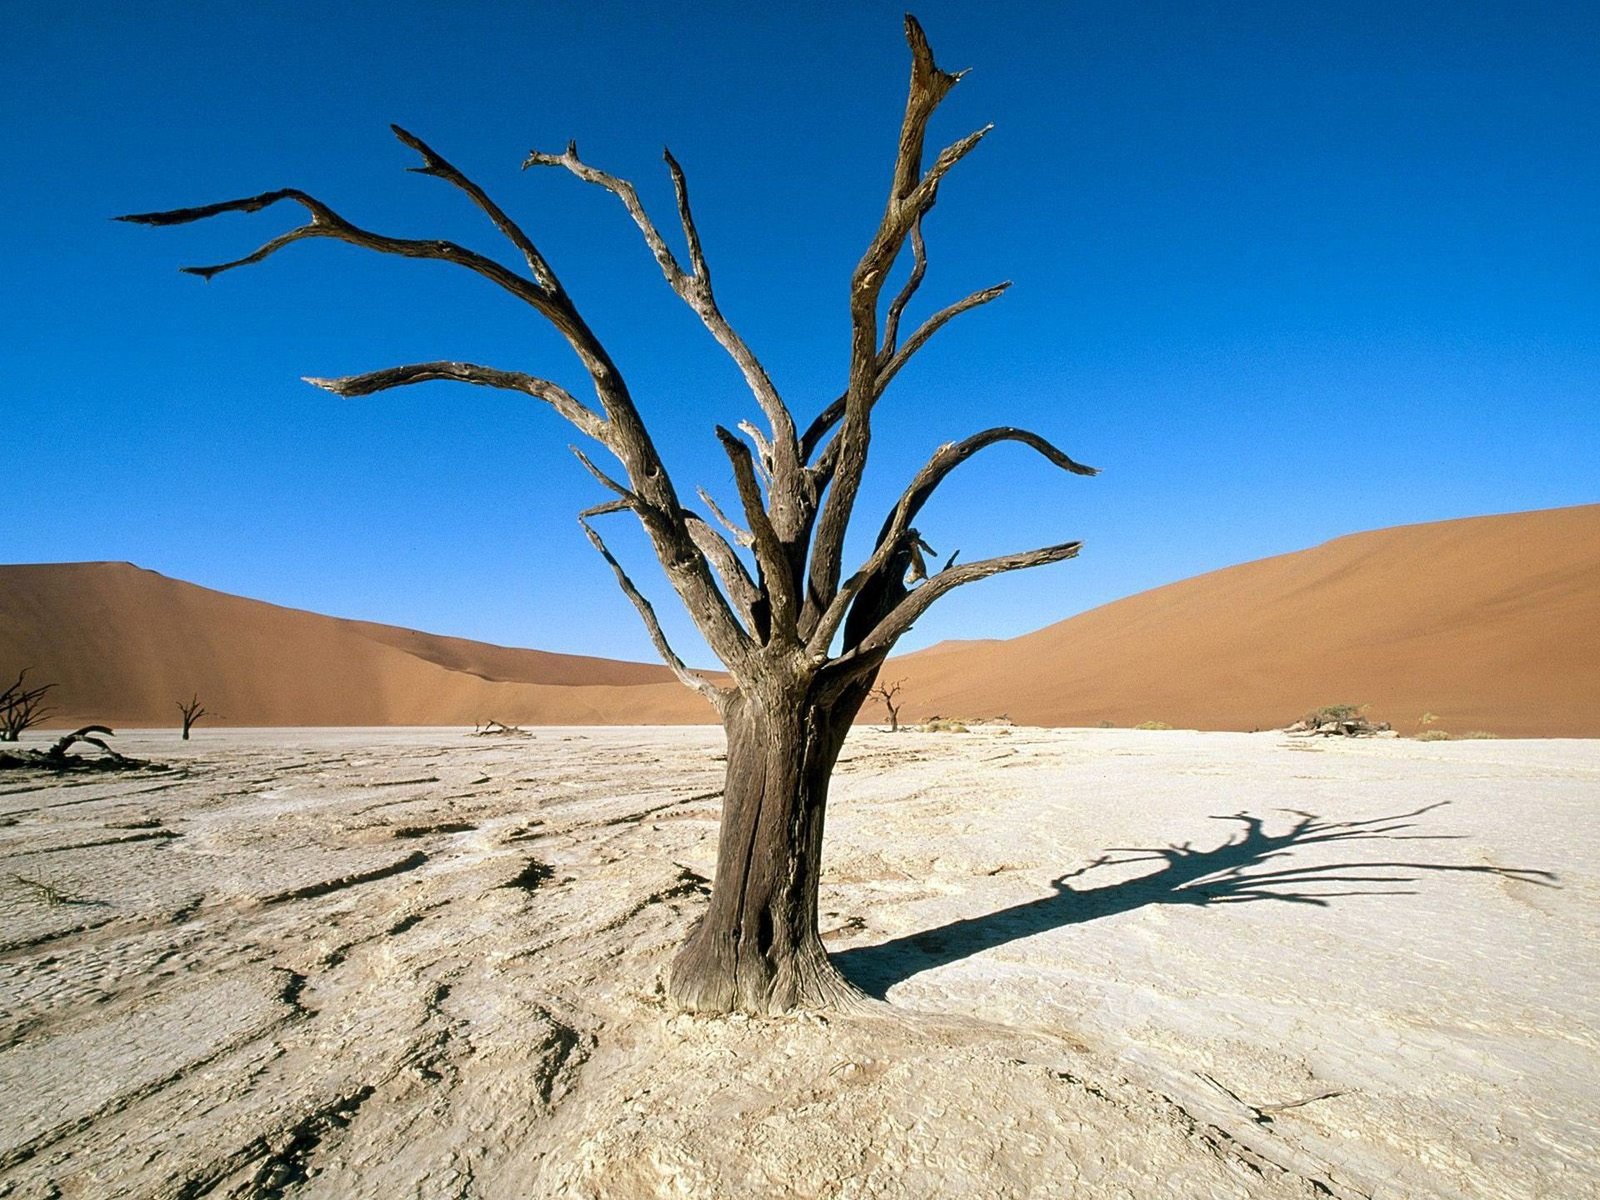 The Namib in Africa